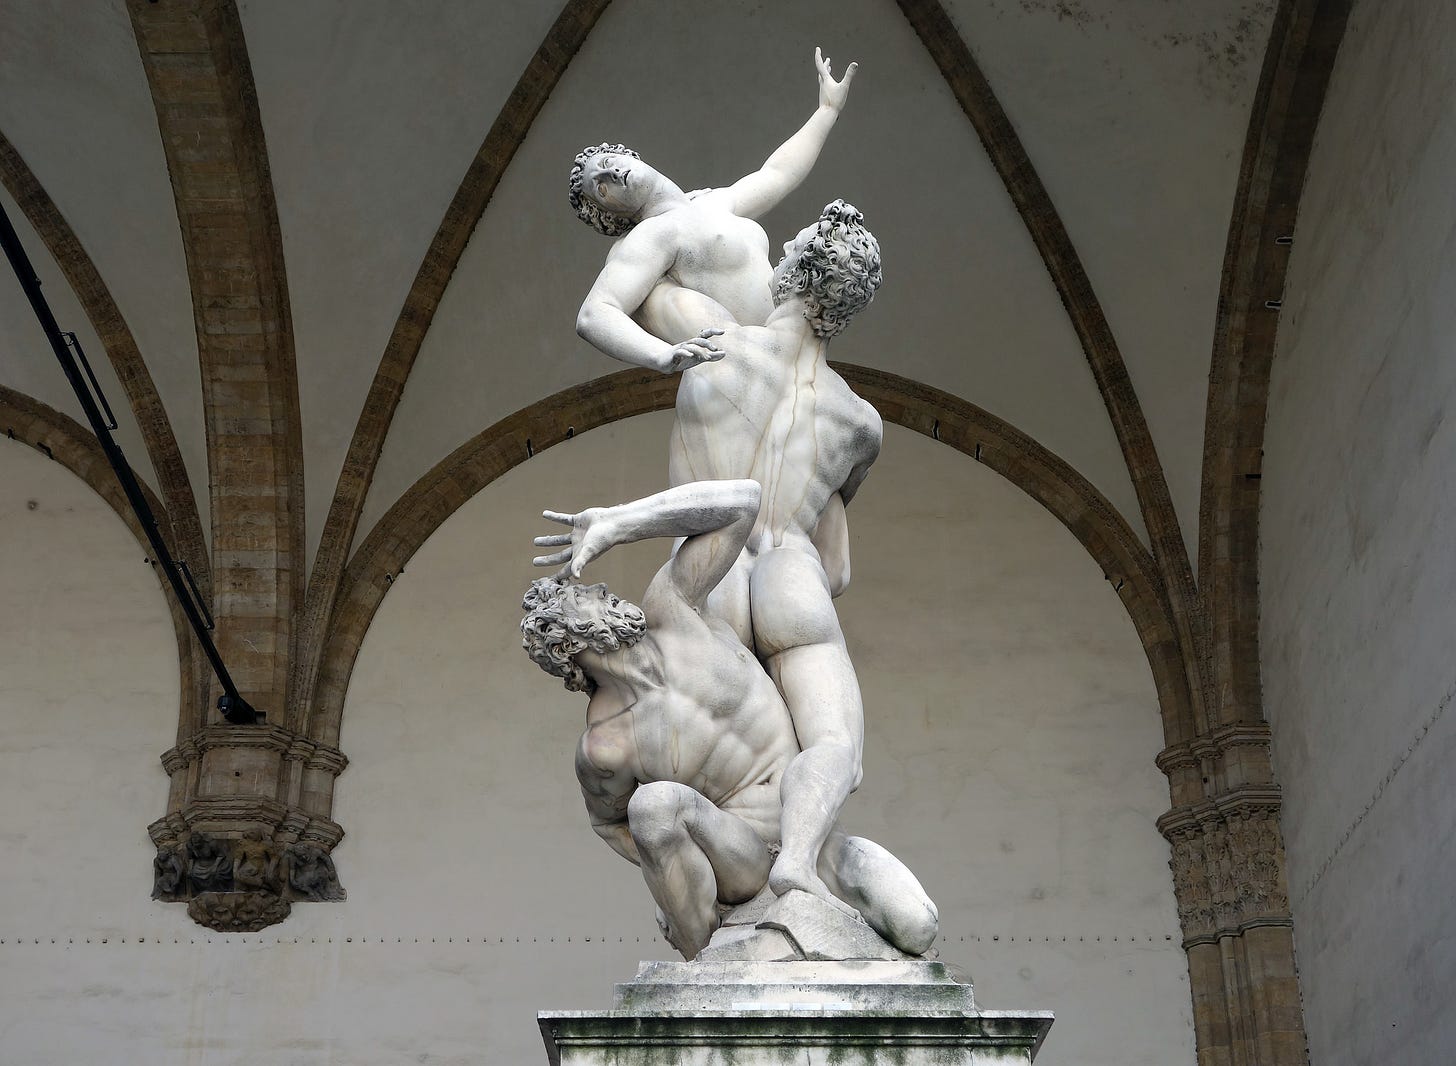 A marble statue of three figures. One man is crouching, while other holds a woman. The woman is reaching out, as if in distress. They are all nude.